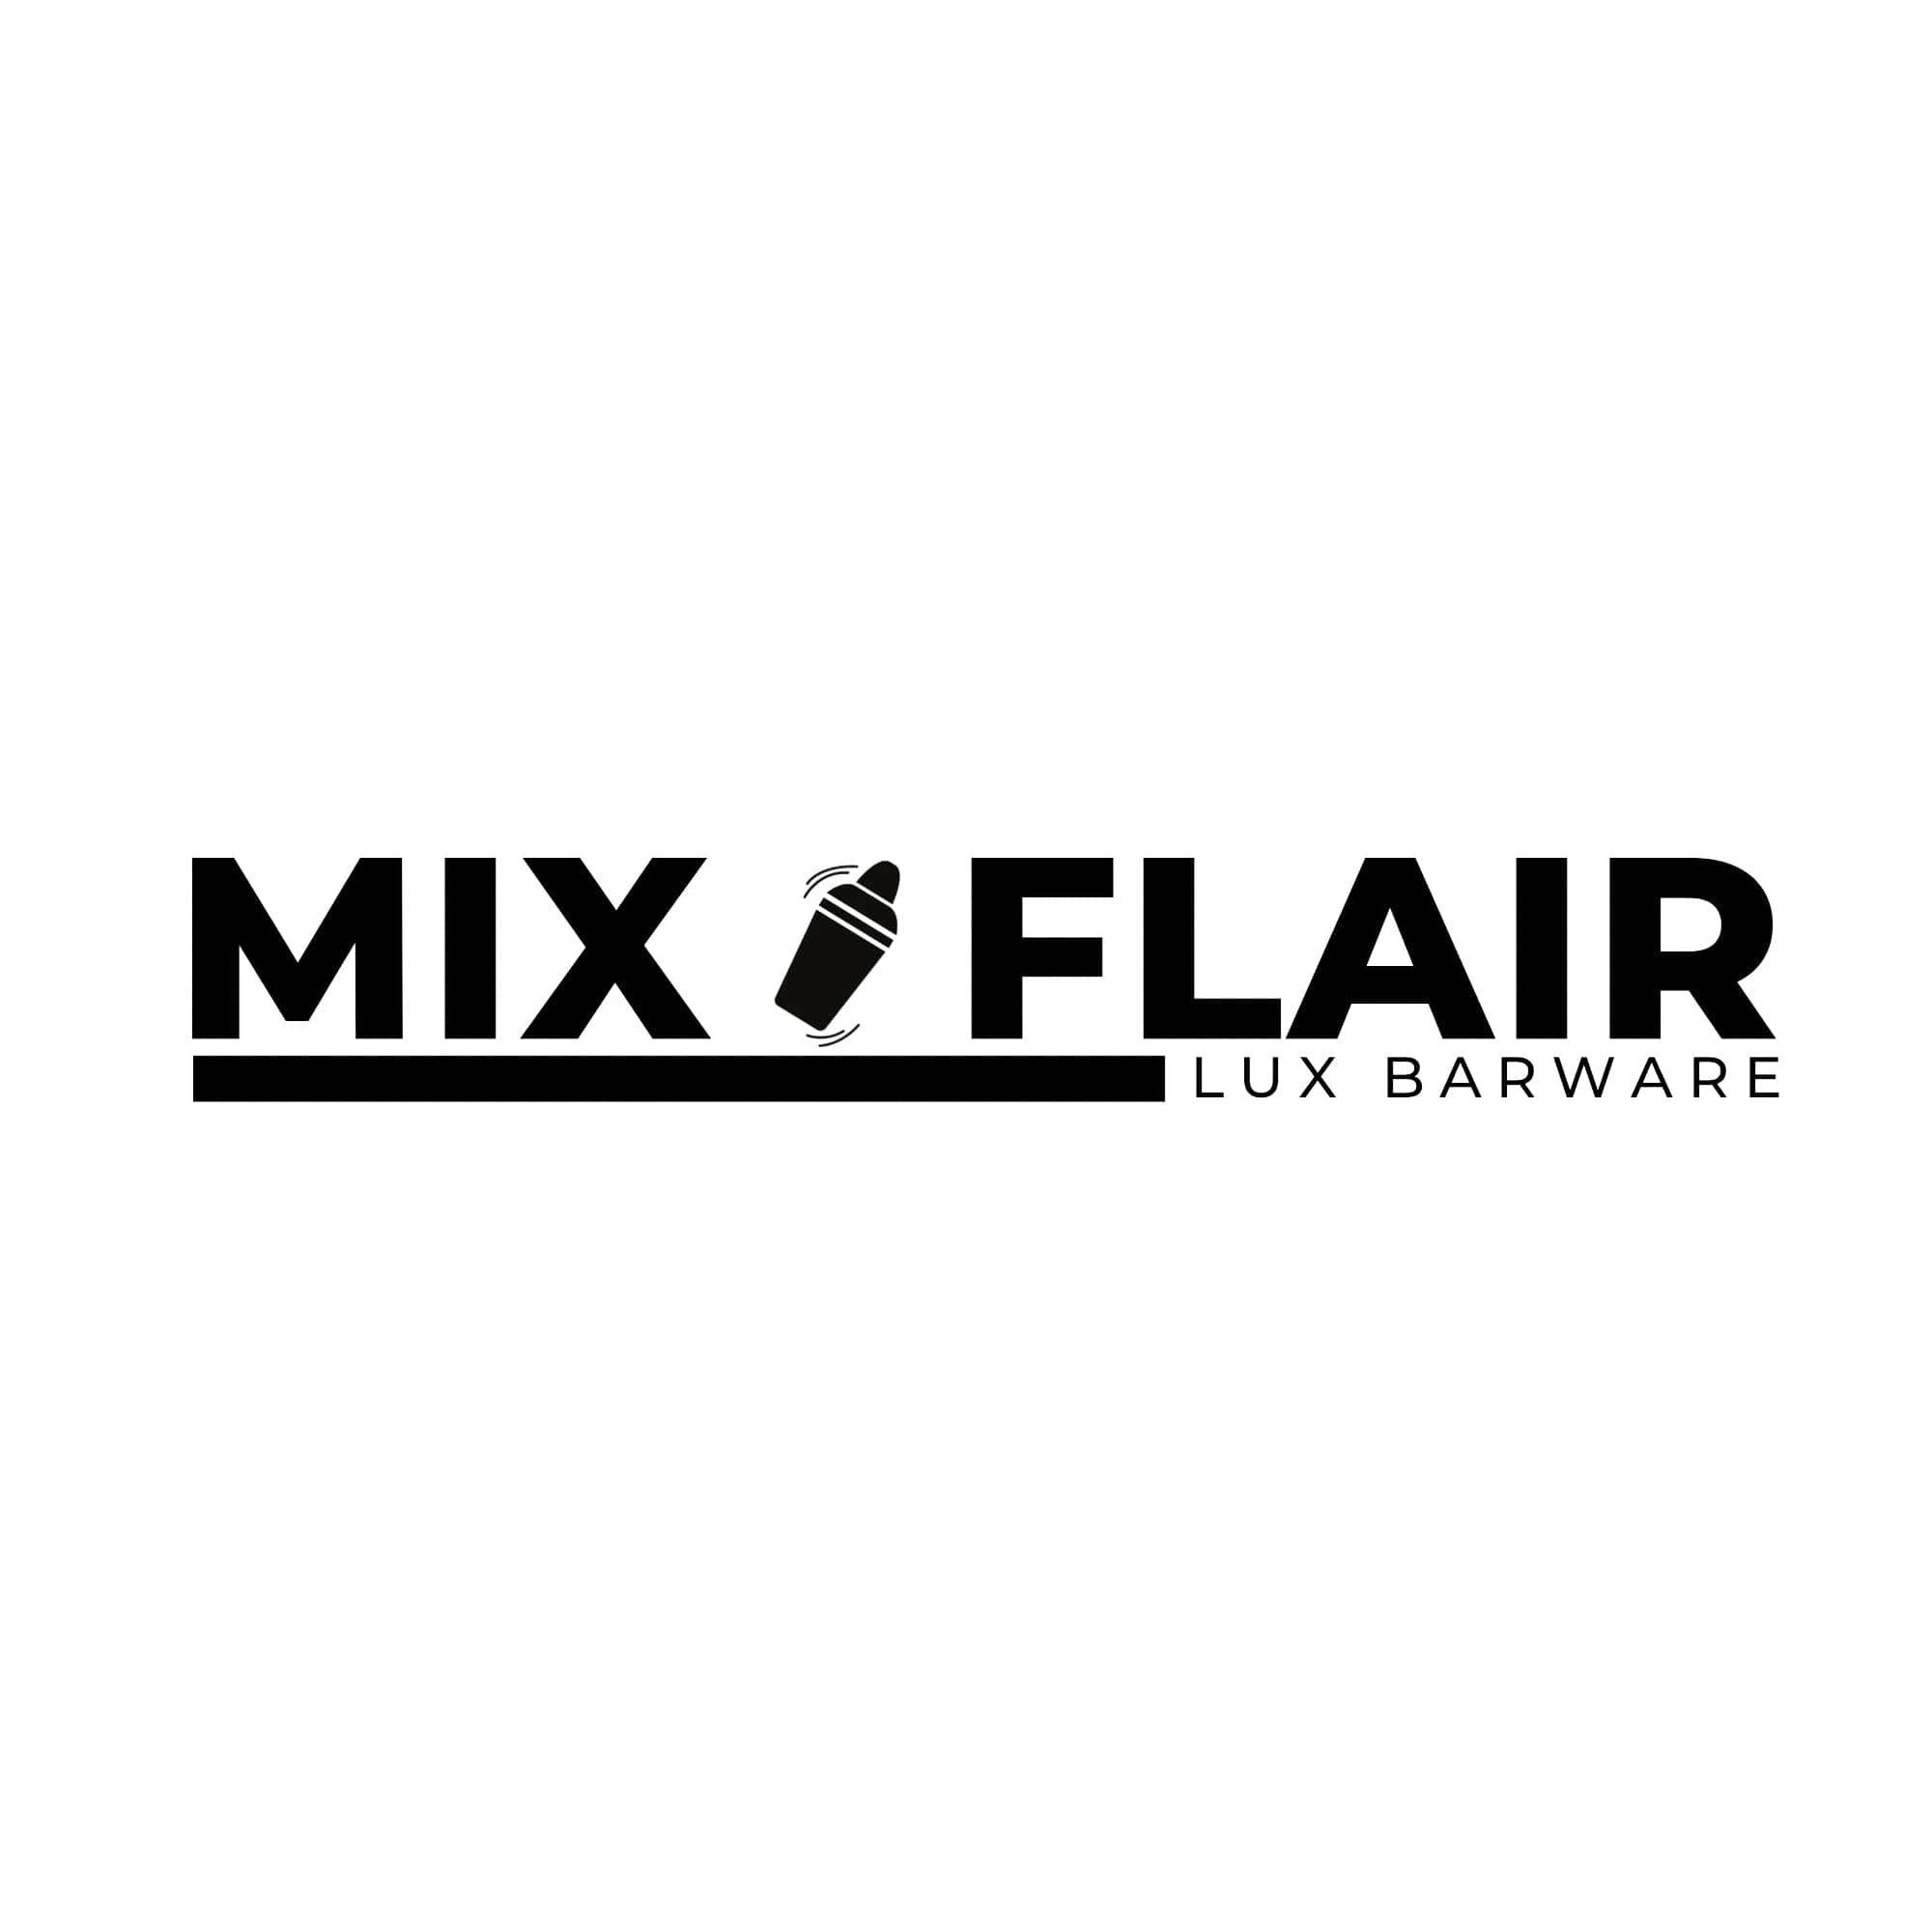  MIX AND FLAIR - LUX BARWARE